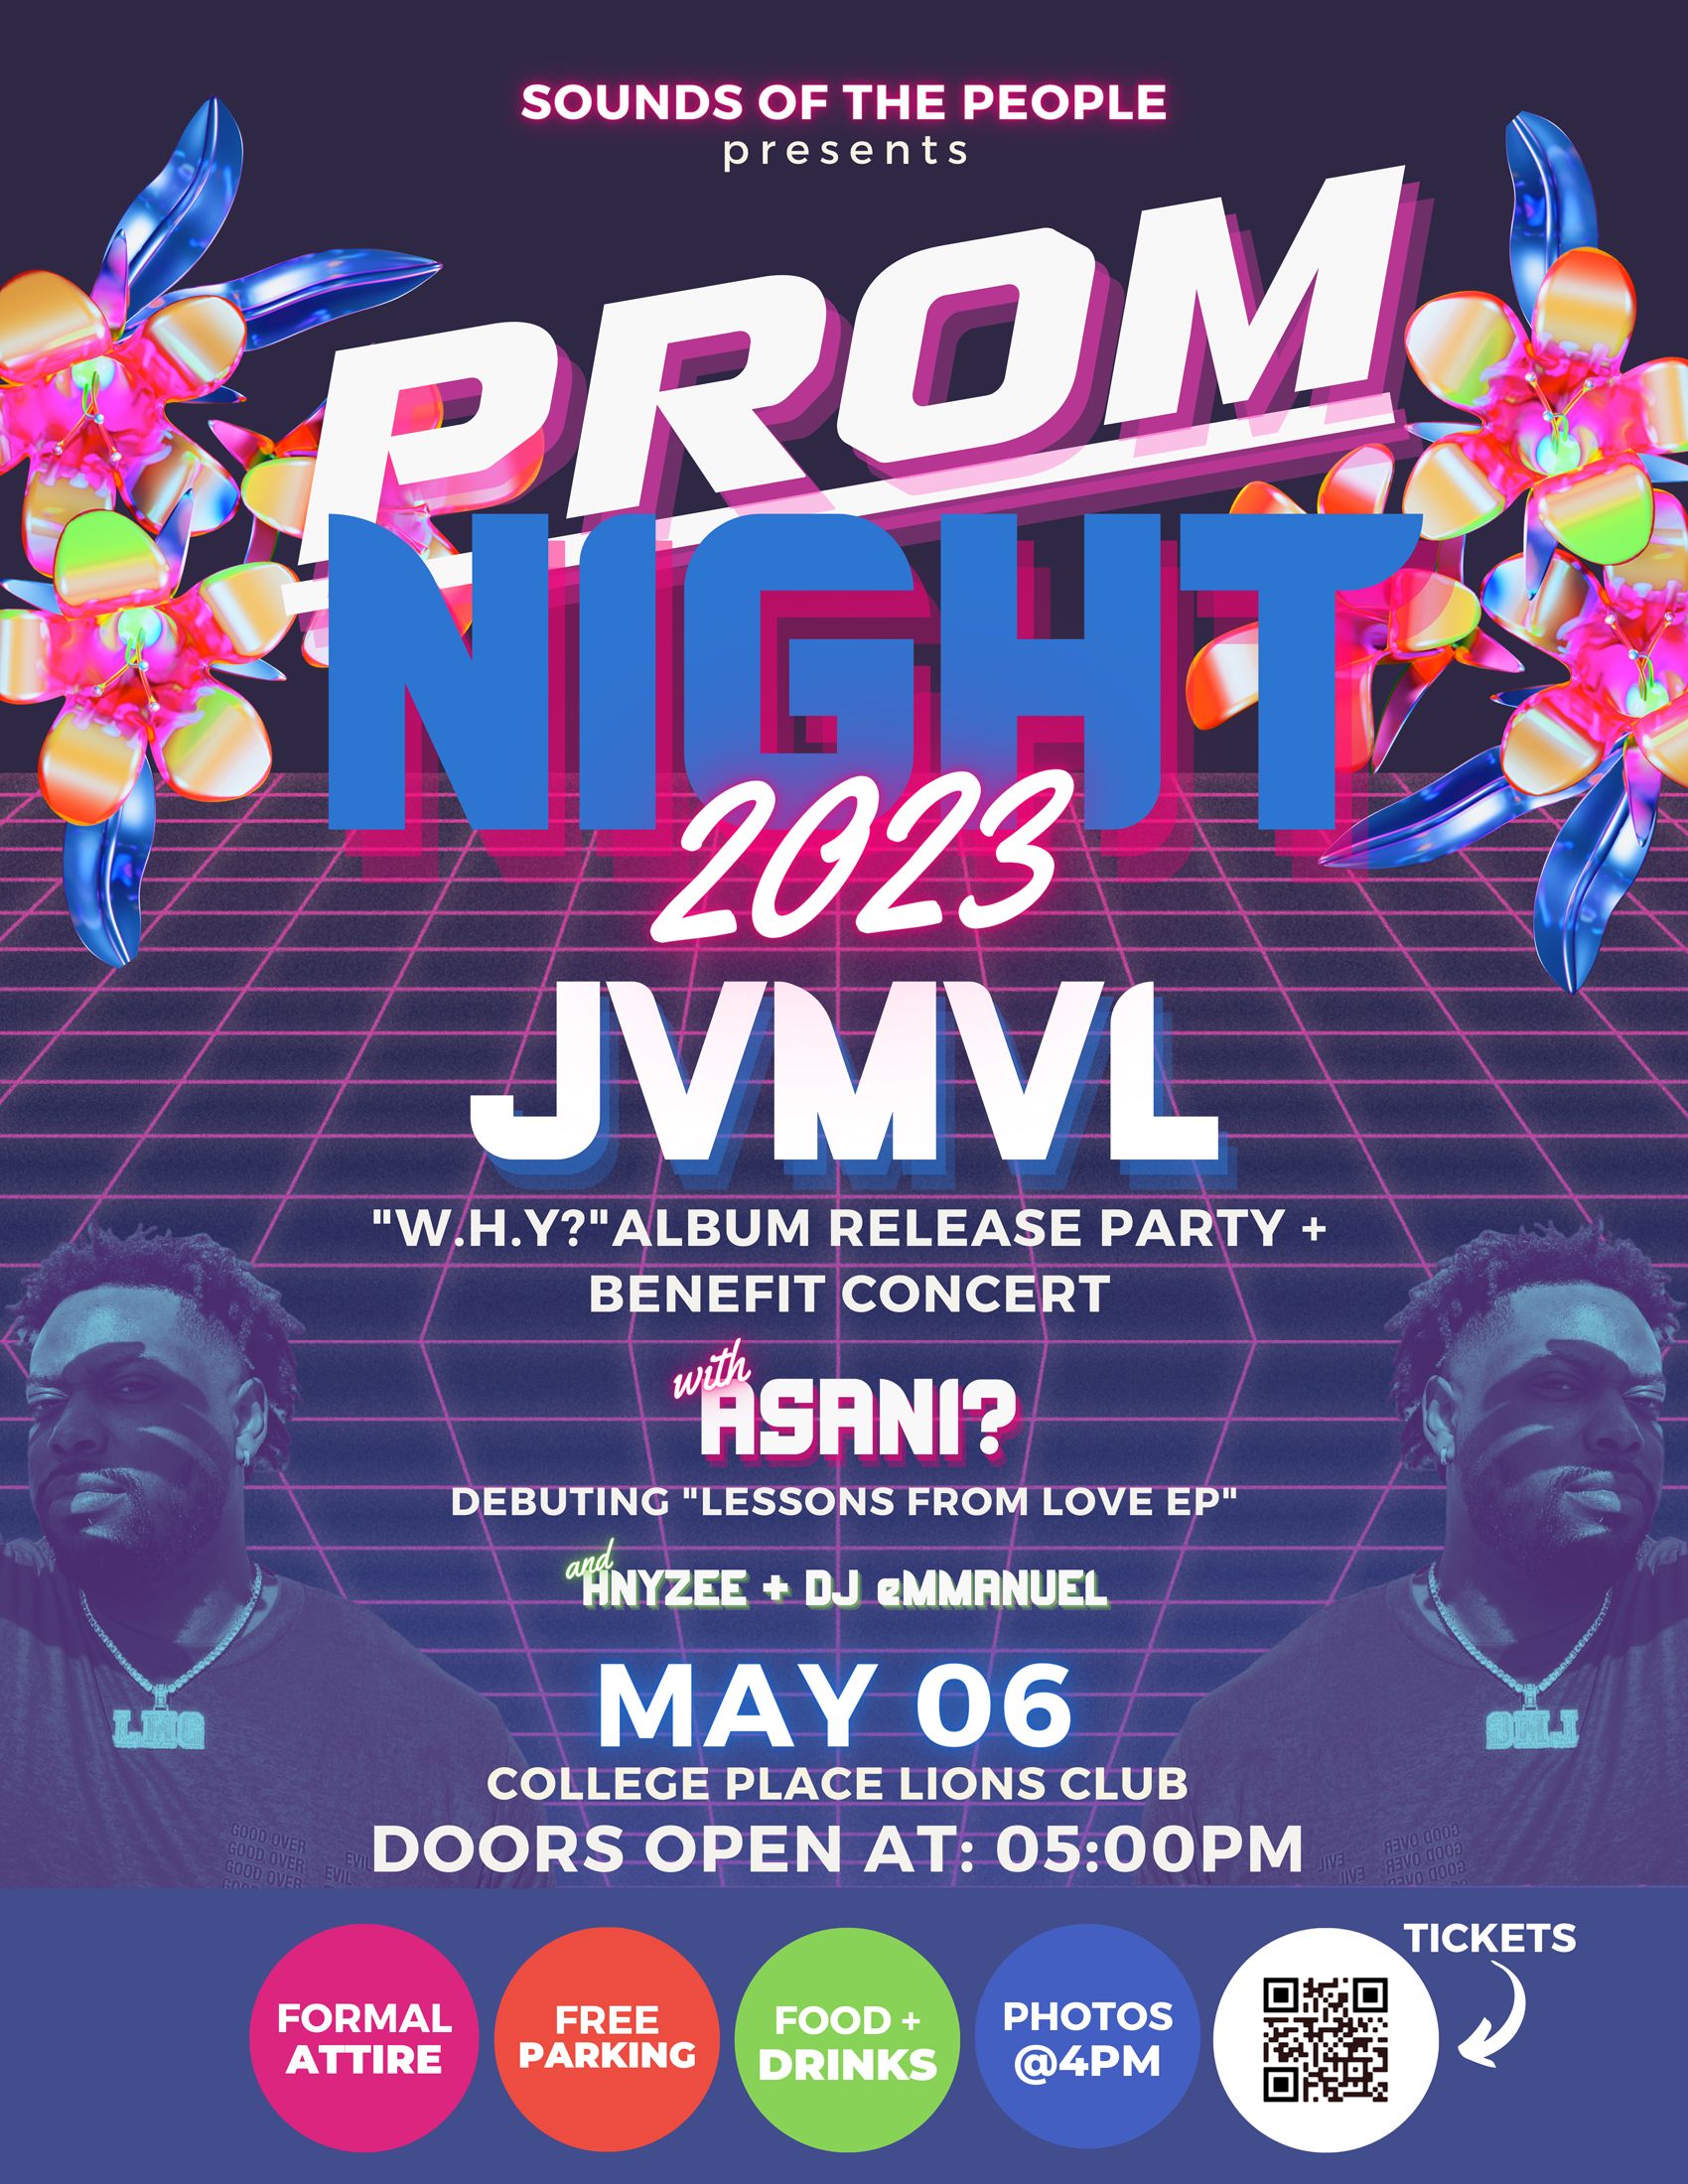 Walla Walla-based SOUNDS OF THE PEOPLE continues legacy of elevating undiscovered artists of Color with ‘Prom Night’ concert for JVMVL Music